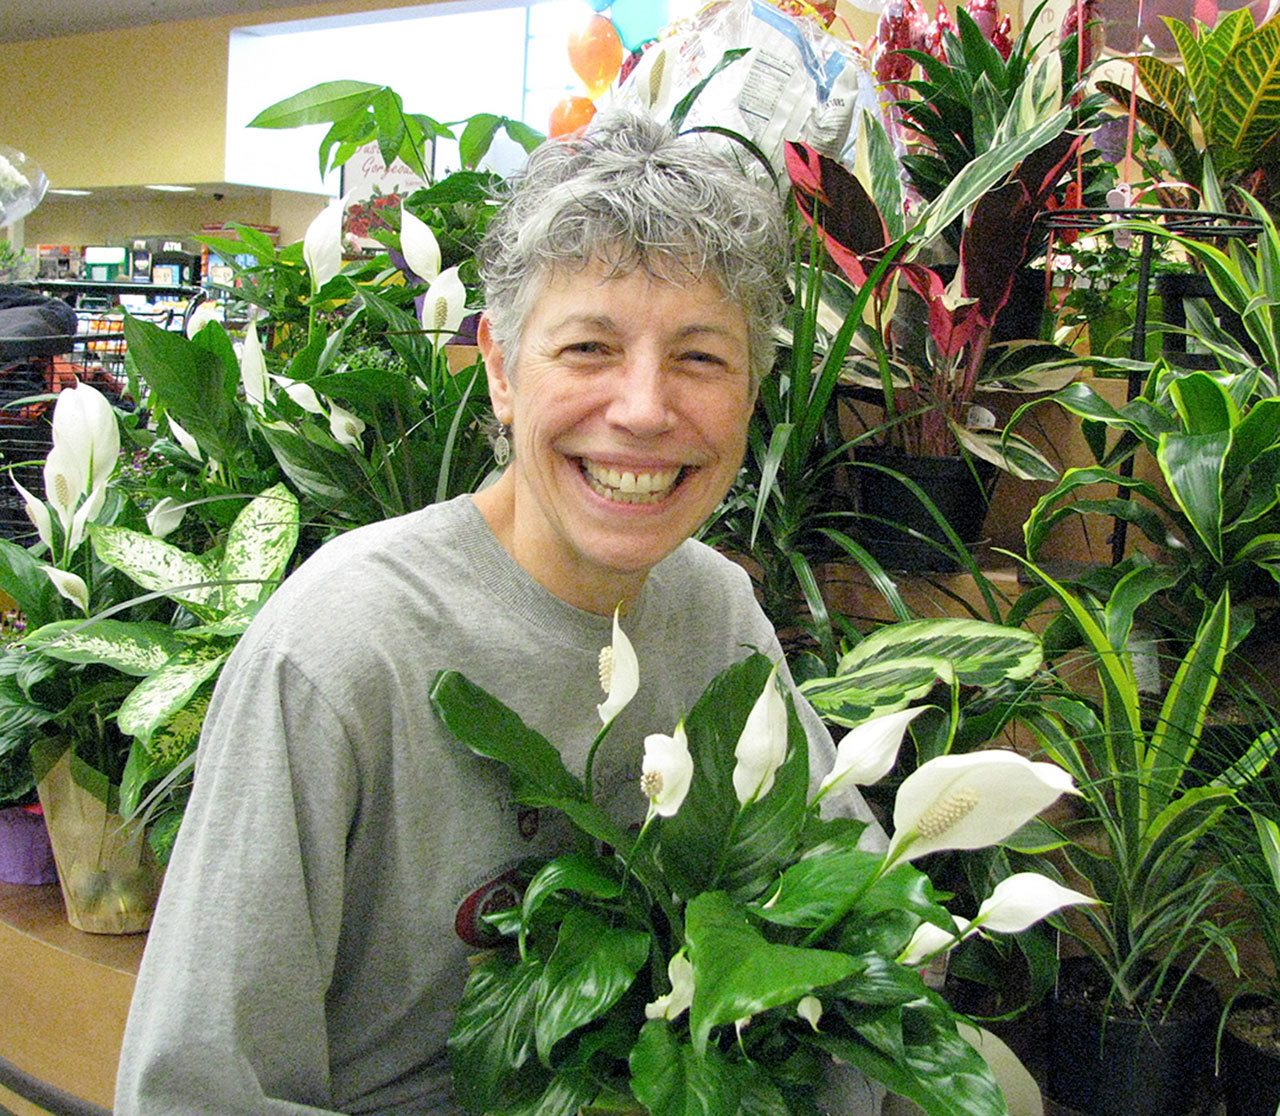 WSU Clallam County Master Gardener Jeannette Stehr-Green will present “Beat the Wintering Garden Blues: Growing Houseplants” at noon Thursday, Feb. 23, in the county commissioners meeting room of the Clallam County Courthouse, Port Angeles. This presentation is part of the Green Thumb Garden Tips educational series sponsored by the WSU Clallam County Master Gardeners on the second and fourth Thursday of every month in Port Angeles. (Photo by Amanda Rosenberg)